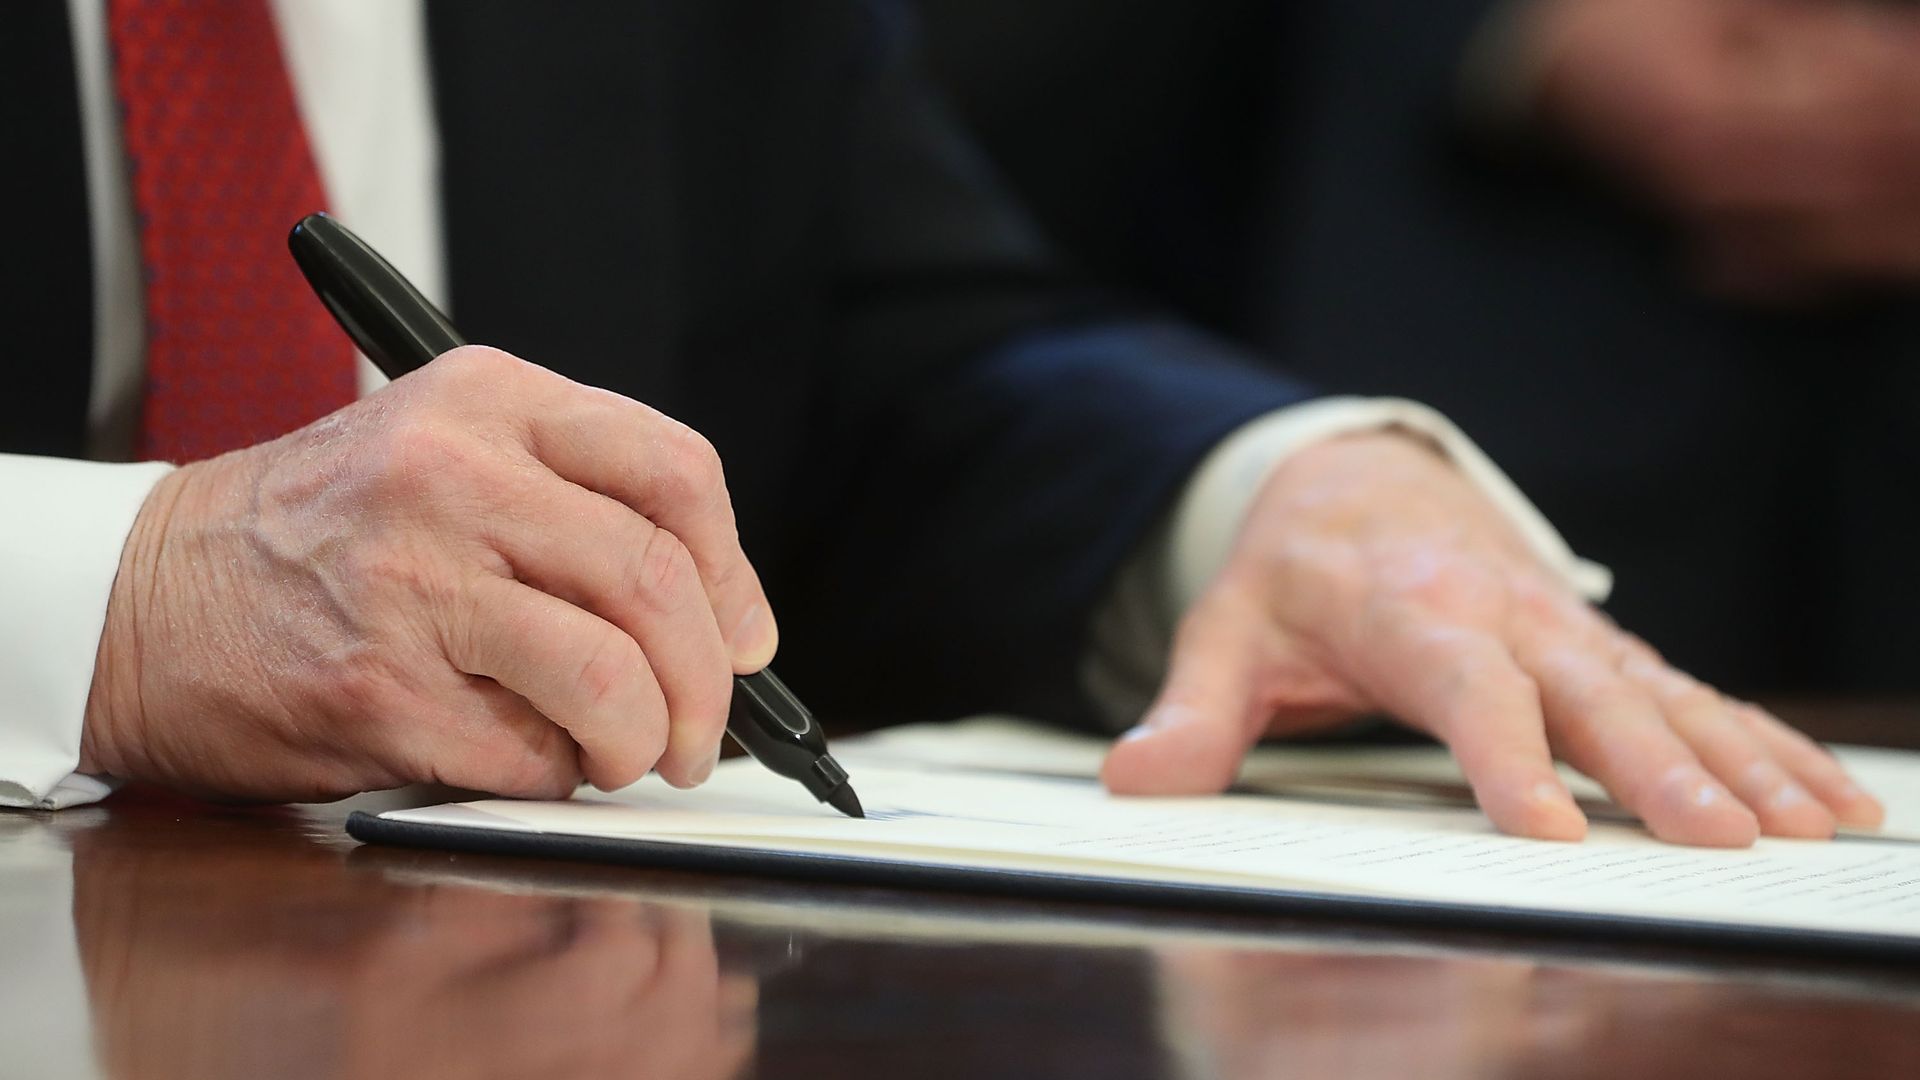 Up-close photo of Trump signing a document with a black Sharpie.